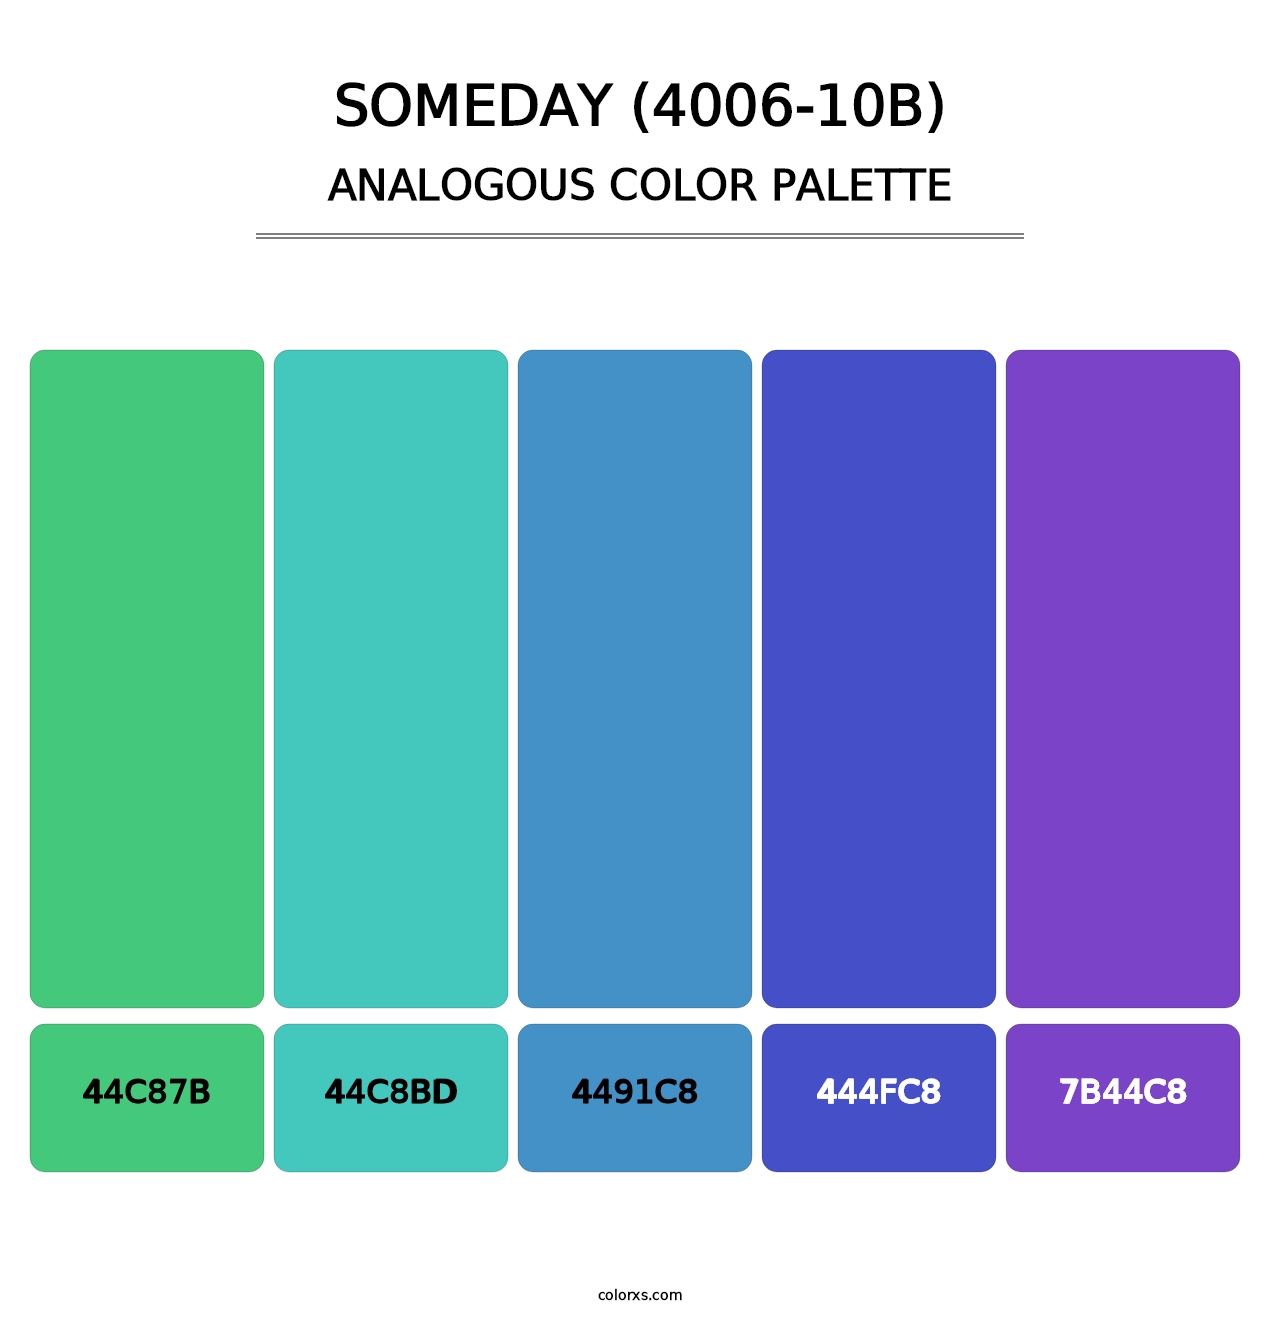 Someday (4006-10B) - Analogous Color Palette